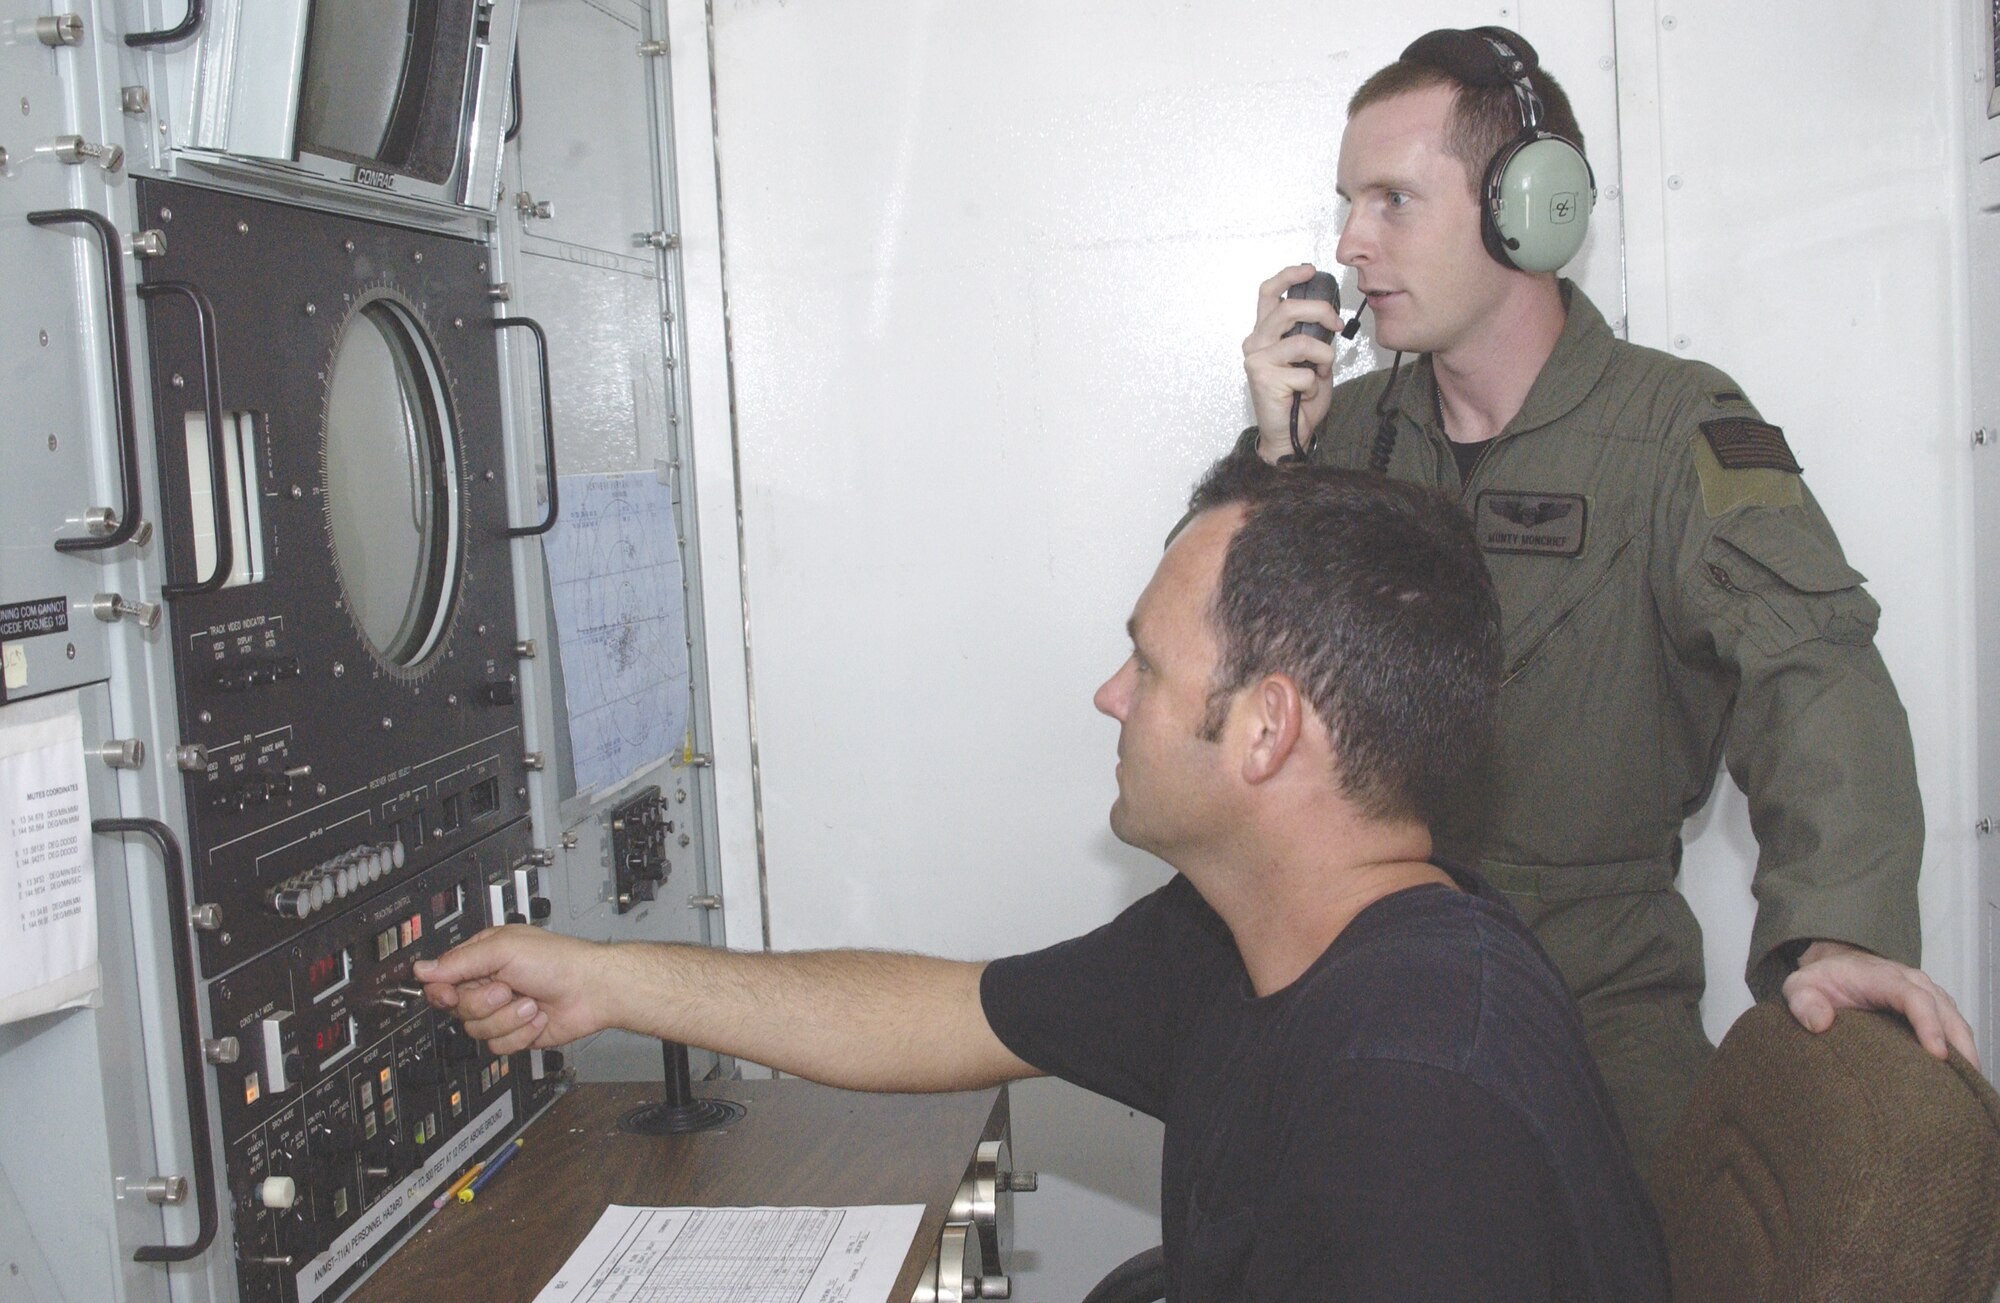 Tech Sgt. Donald Taylor (front), 266th Range Squadron ground radar technician, coordinates simulated threat signals with 1st Lt. Monty Moncrief, 23rd Expeditionary Bomb Squadron electronic warfare officer. The Multiple Threat Emitter System shapes radio wave pulses to look like signals radiated by aircraft threats, such as surface-to-air missiles. (U.S. Air Force photo/Staff Sgt. Eric Petosky)